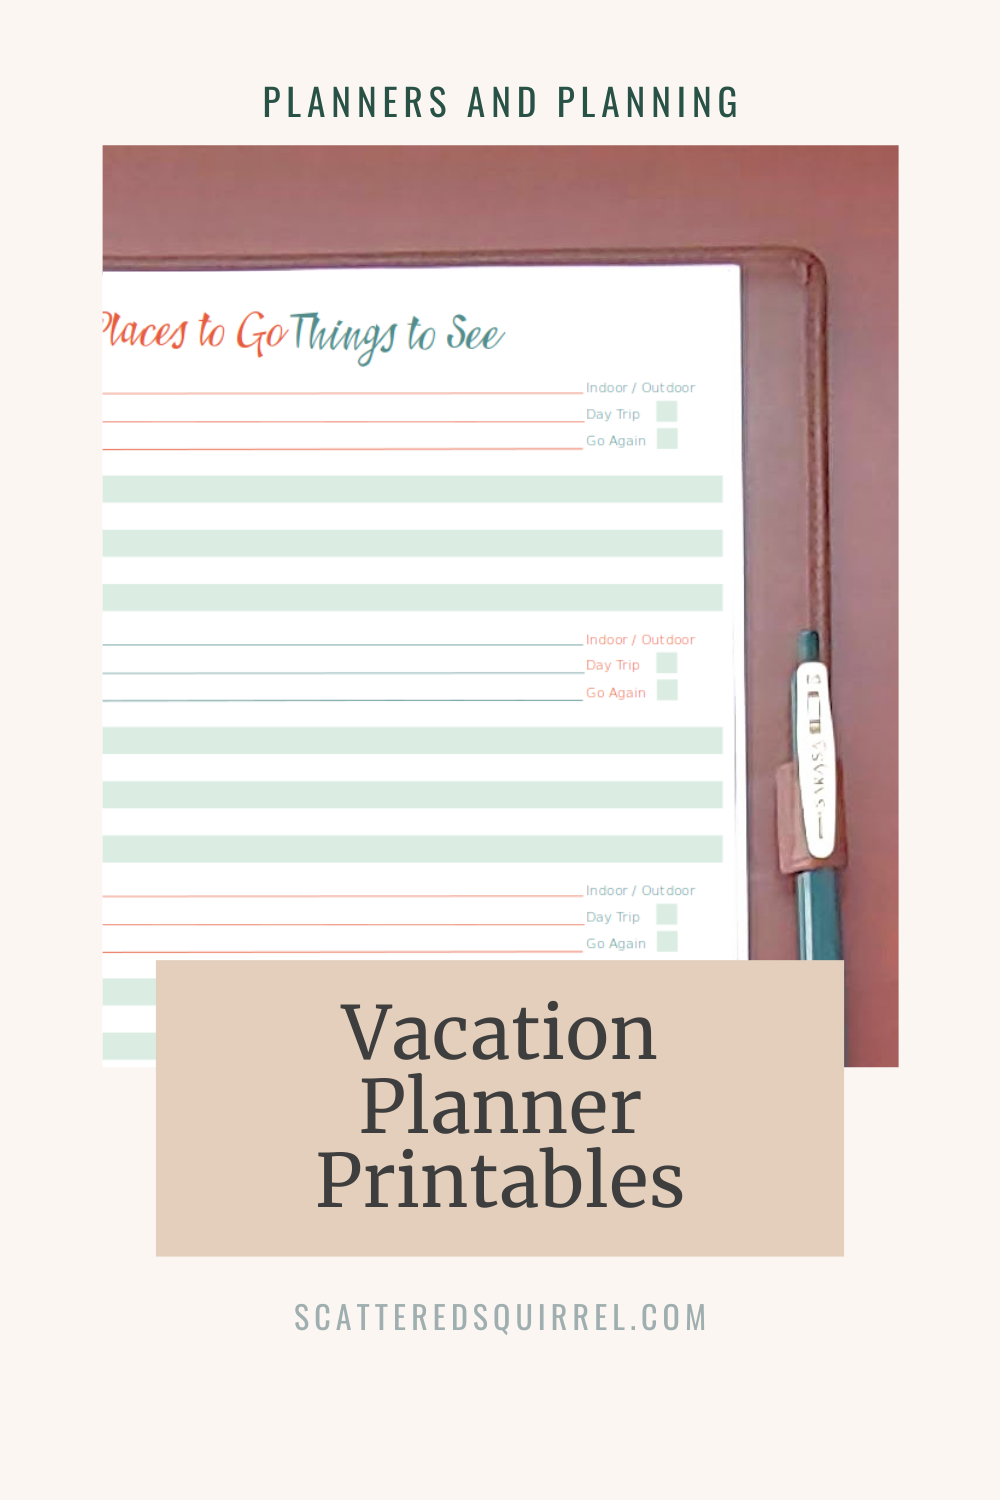 This image is a large, light sand coloured rectangle in portrait orientation. "Planners and Planning" is written at the top in dark green text. Below that is a photo of the top right two thirds of a planner which is lying on a wooden desk. The page on the planner shows a vacation planner printable titled Places to Go Things to See. It's a colourful page designed in orange and teal. Under the photo is a tan box with dark grey title text that says, "Vacation Planner Printables"